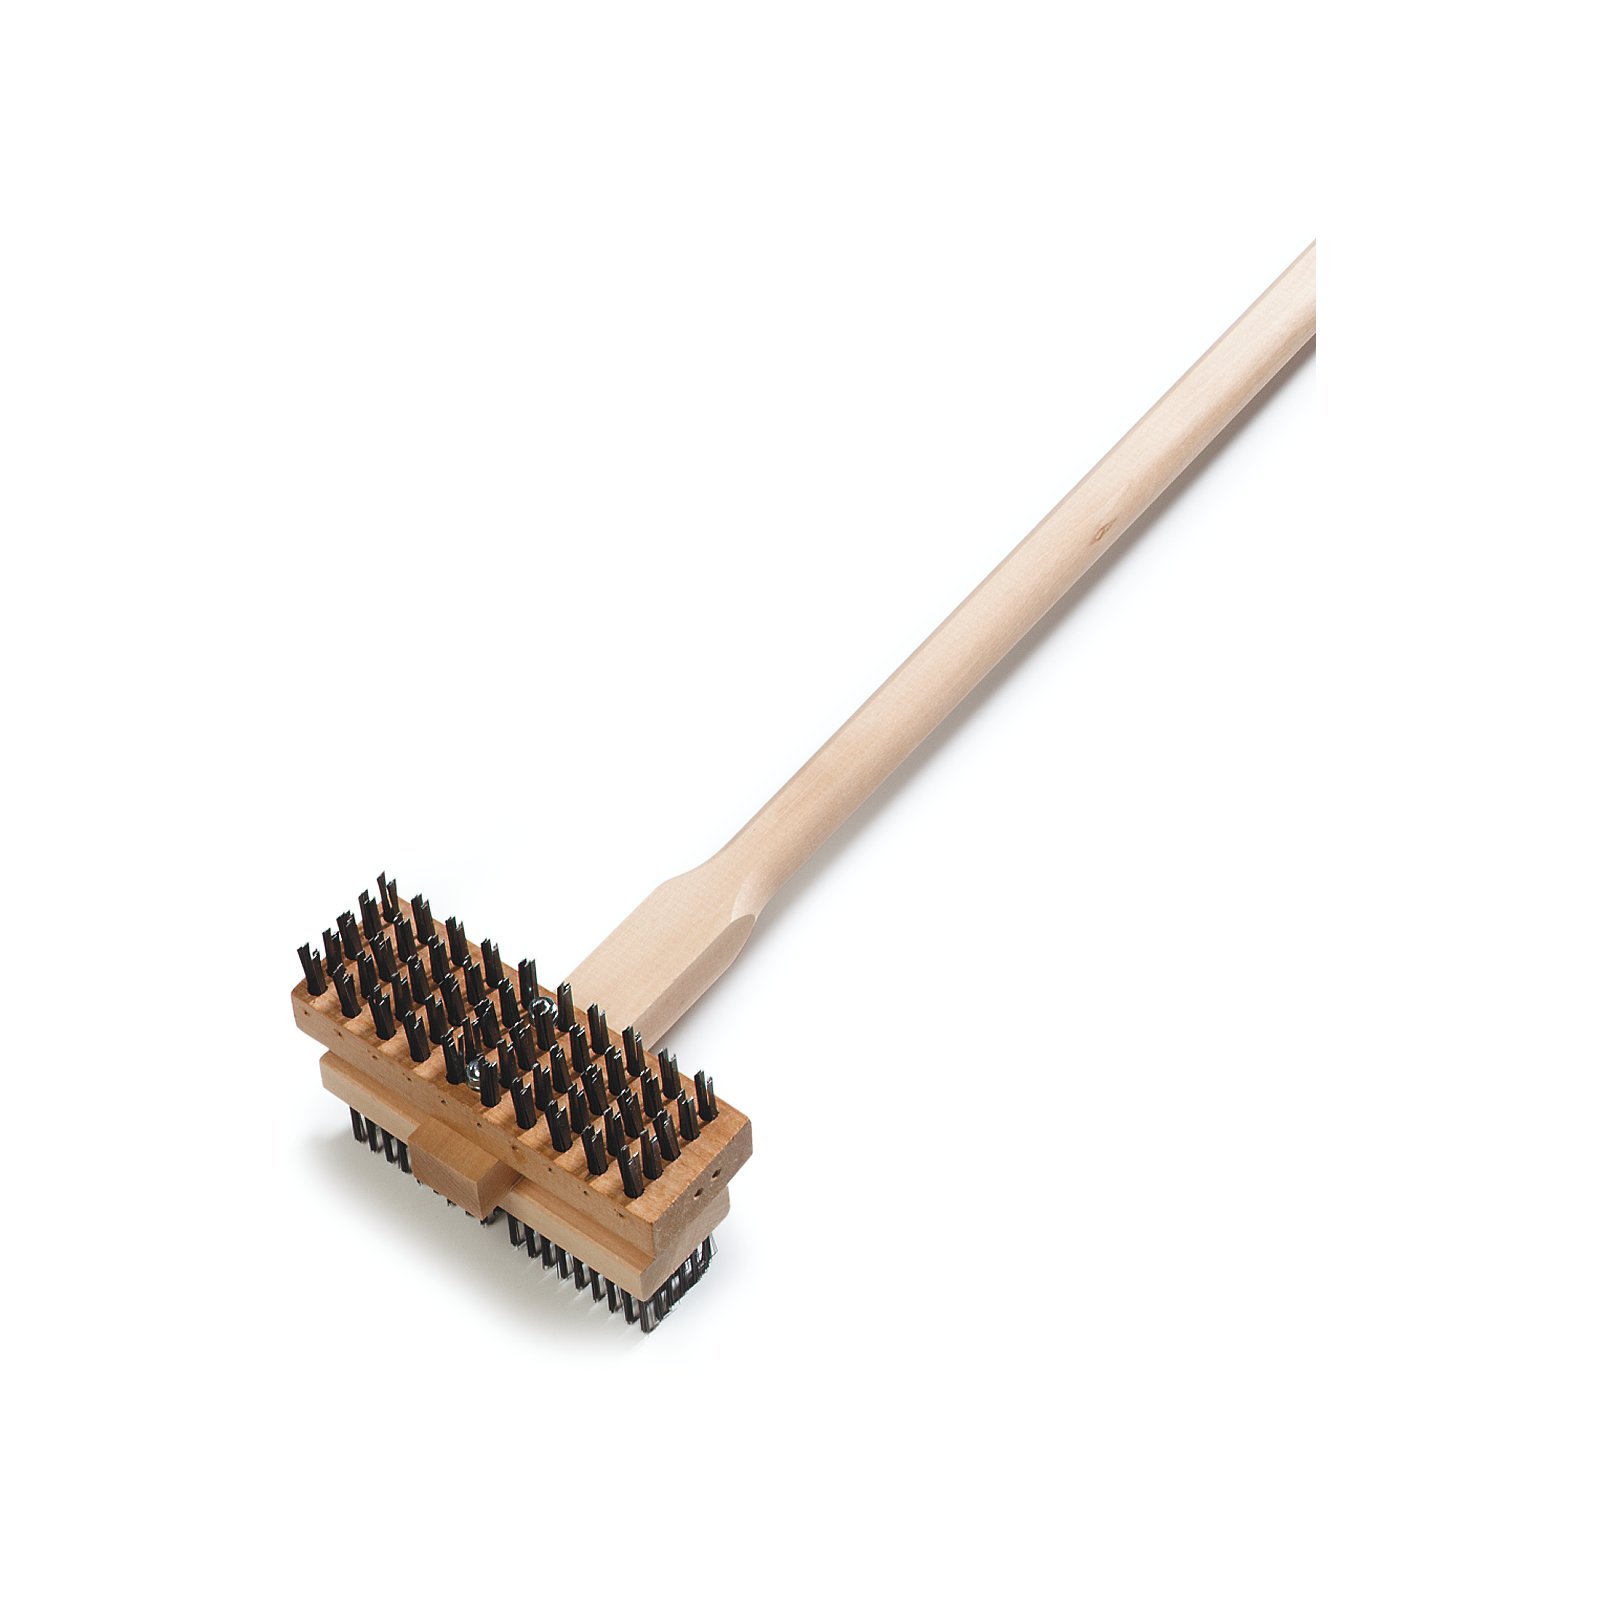 Thin Grill Brushes – Kitchen Perfection LLC